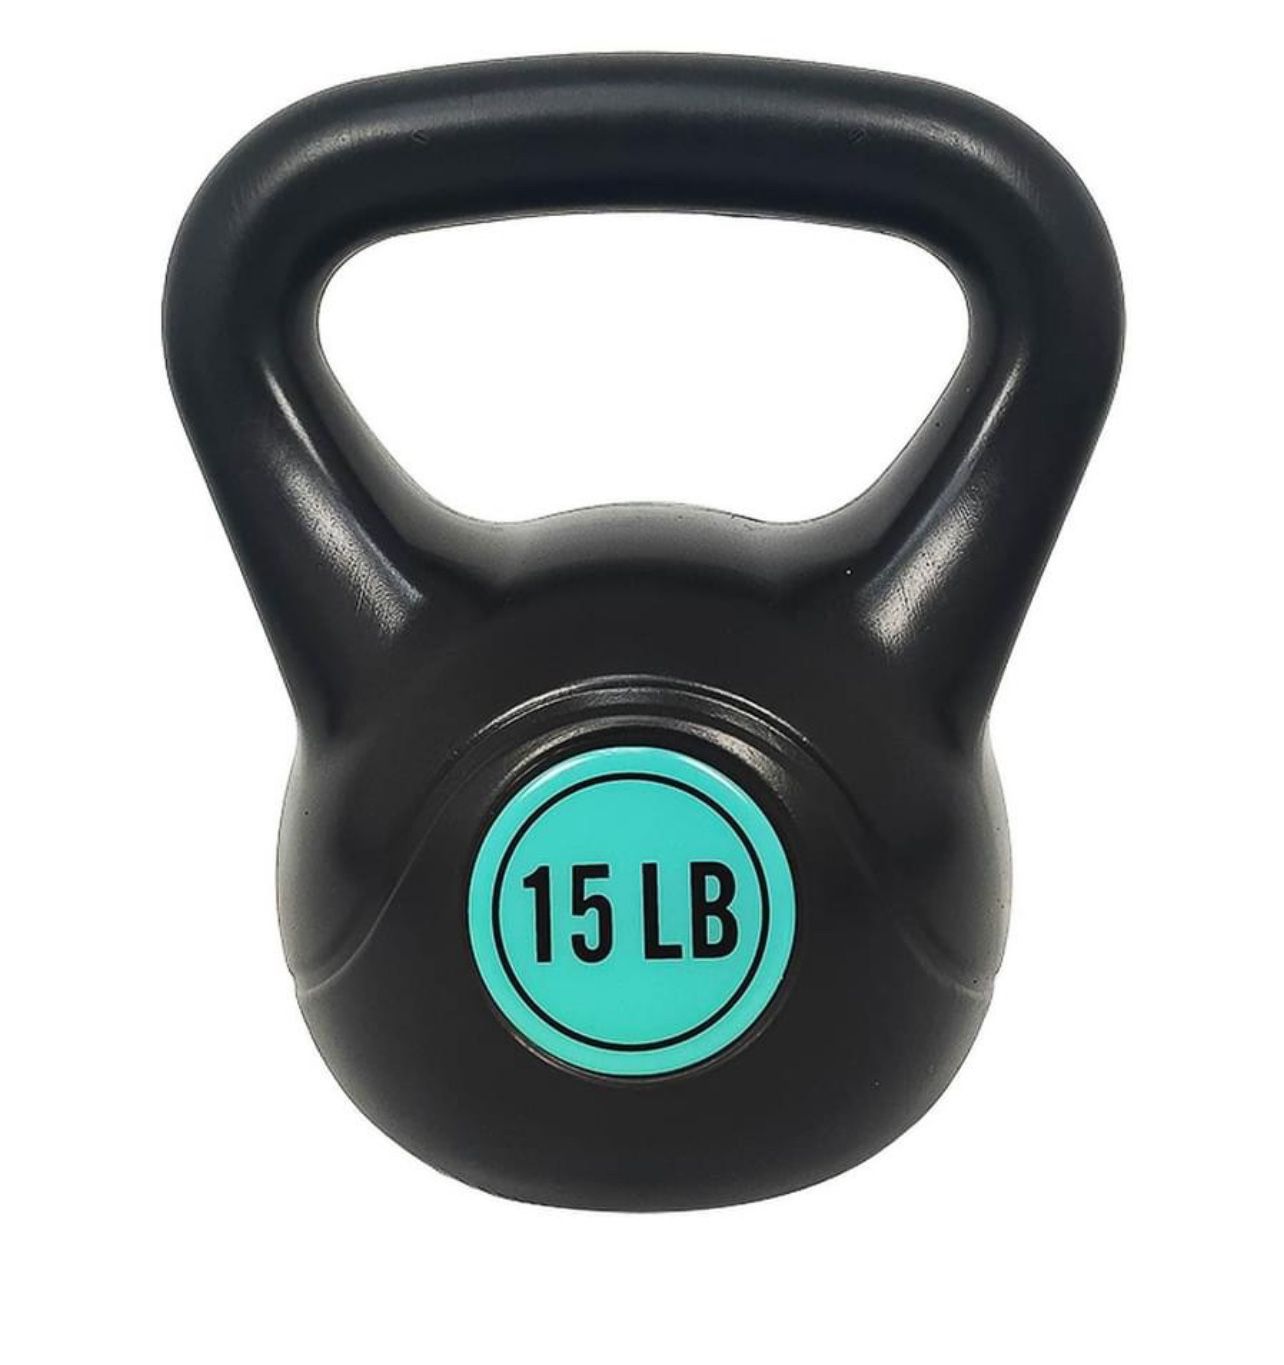 Wide Grip Kettlebell Exercise Fitness Weight Set, 4-Pieces: 5lb, 10lb, 15lb and 20lb Ket